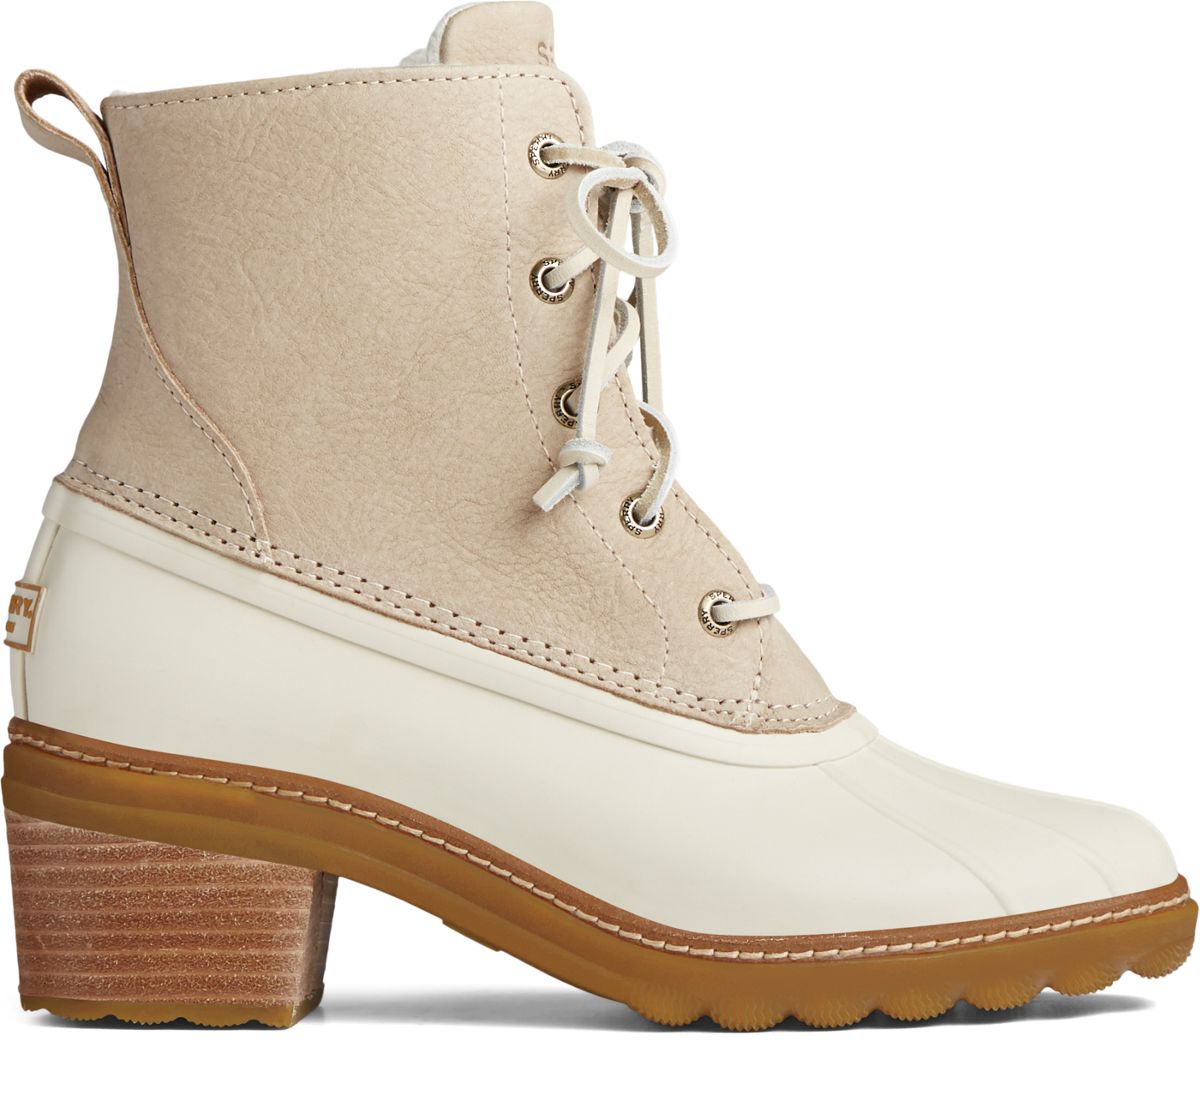 sperry duck boots outlet